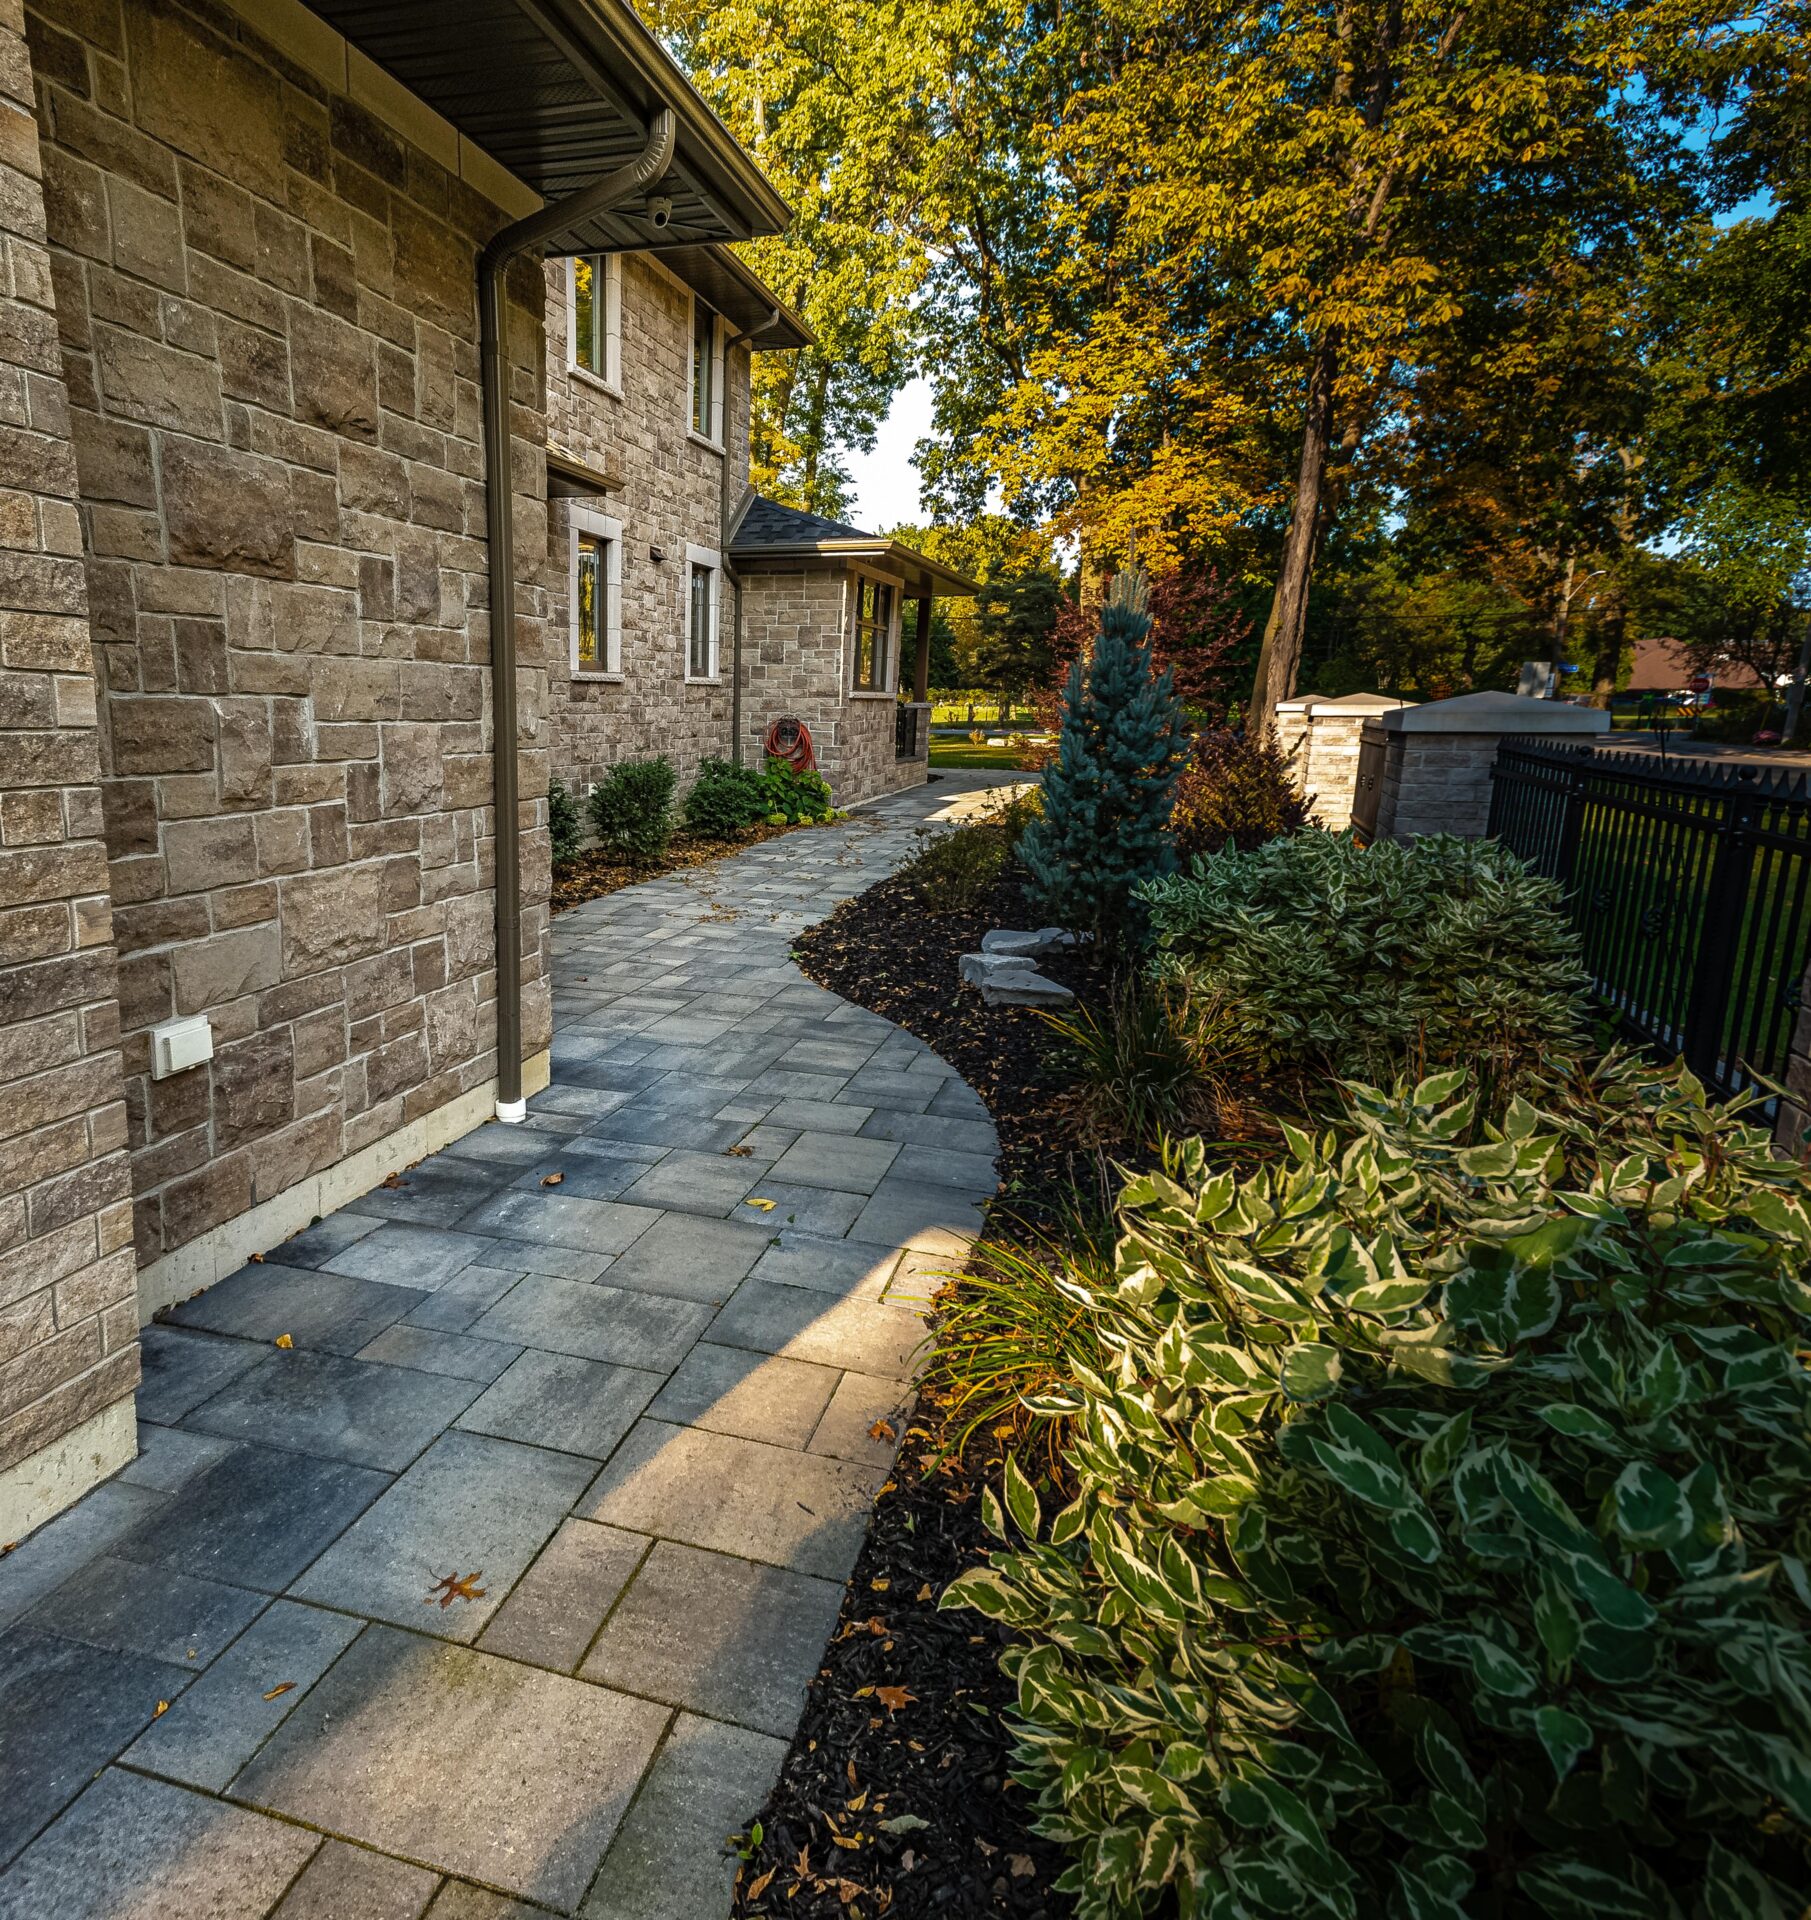 This image displays a landscaped pathway bordered by shrubs and plants leading up to a stone house with large windows and a clear blue sky overhead.